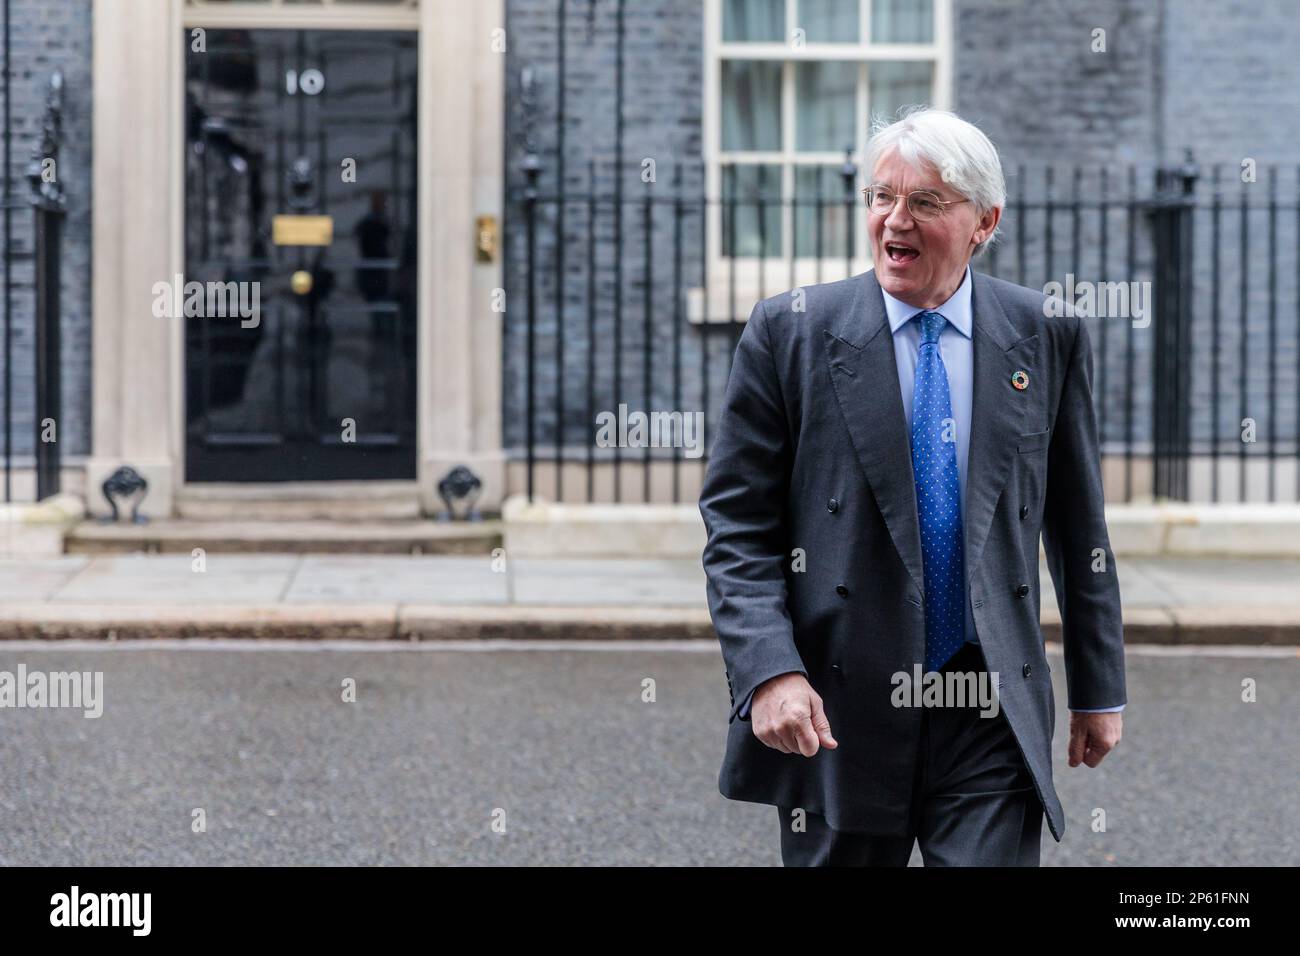 Downing Street, London, UK. 07 March 2023.  Andrew Mitchell MP, Minister of State (Minister for Development) in the Foreign, Commonwealth and Development Office, attends the weekly Cabinet Meeting at 10 Downing Street. Photo by Amanda Rose/Alamy Live News Stock Photo